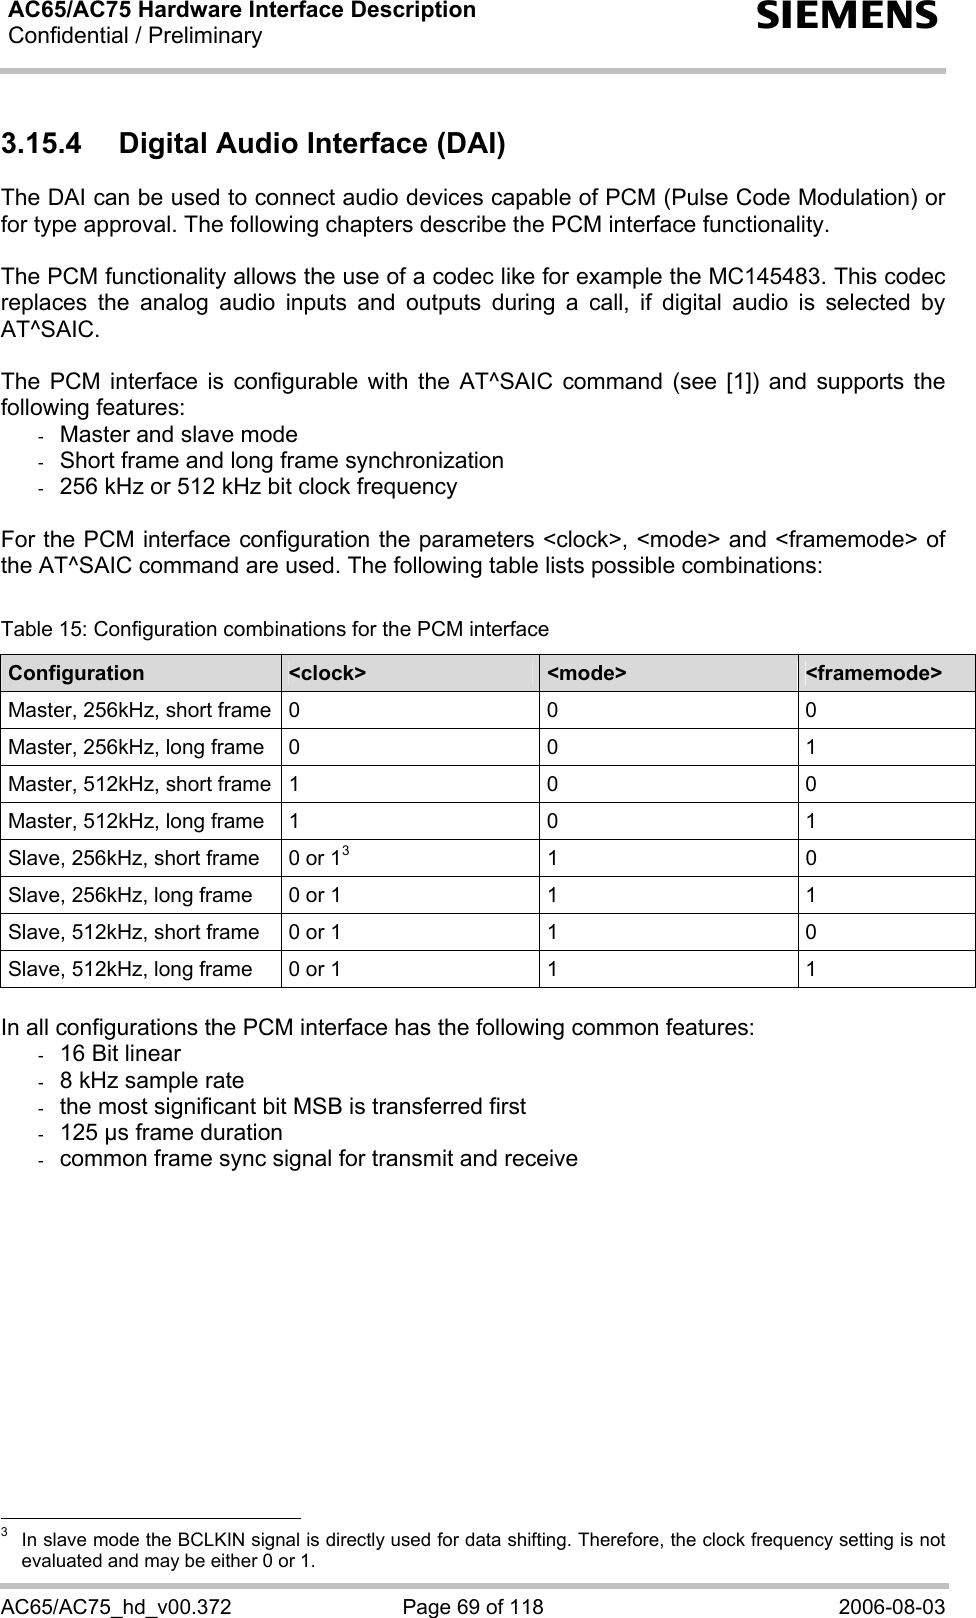 AC65/AC75 Hardware Interface Description Confidential / Preliminary   s AC65/AC75_hd_v00.372  Page 69 of 118  2006-08-03 3.15.4  Digital Audio Interface (DAI) The DAI can be used to connect audio devices capable of PCM (Pulse Code Modulation) or for type approval. The following chapters describe the PCM interface functionality.  The PCM functionality allows the use of a codec like for example the MC145483. This codec replaces the analog audio inputs and outputs during a call, if digital audio is selected by AT^SAIC.  The PCM interface is configurable with the AT^SAIC command (see [1]) and supports the following features: -  Master and slave mode -  Short frame and long frame synchronization -  256 kHz or 512 kHz bit clock frequency  For the PCM interface configuration the parameters &lt;clock&gt;, &lt;mode&gt; and &lt;framemode&gt; of the AT^SAIC command are used. The following table lists possible combinations:  Table 15: Configuration combinations for the PCM interface Configuration  &lt;clock&gt;  &lt;mode&gt;  &lt;framemode&gt; Master, 256kHz, short frame  0  0  0 Master, 256kHz, long frame  0  0  1 Master, 512kHz, short frame  1  0  0 Master, 512kHz, long frame  1  0  1 Slave, 256kHz, short frame  0 or 13 1  0 Slave, 256kHz, long frame  0 or 1  1  1 Slave, 512kHz, short frame  0 or 1  1  0 Slave, 512kHz, long frame  0 or 1  1  1  In all configurations the PCM interface has the following common features: -  16 Bit linear  -  8 kHz sample rate -  the most significant bit MSB is transferred first -  125 µs frame duration -  common frame sync signal for transmit and receive                                                   3   In slave mode the BCLKIN signal is directly used for data shifting. Therefore, the clock frequency setting is not evaluated and may be either 0 or 1. 